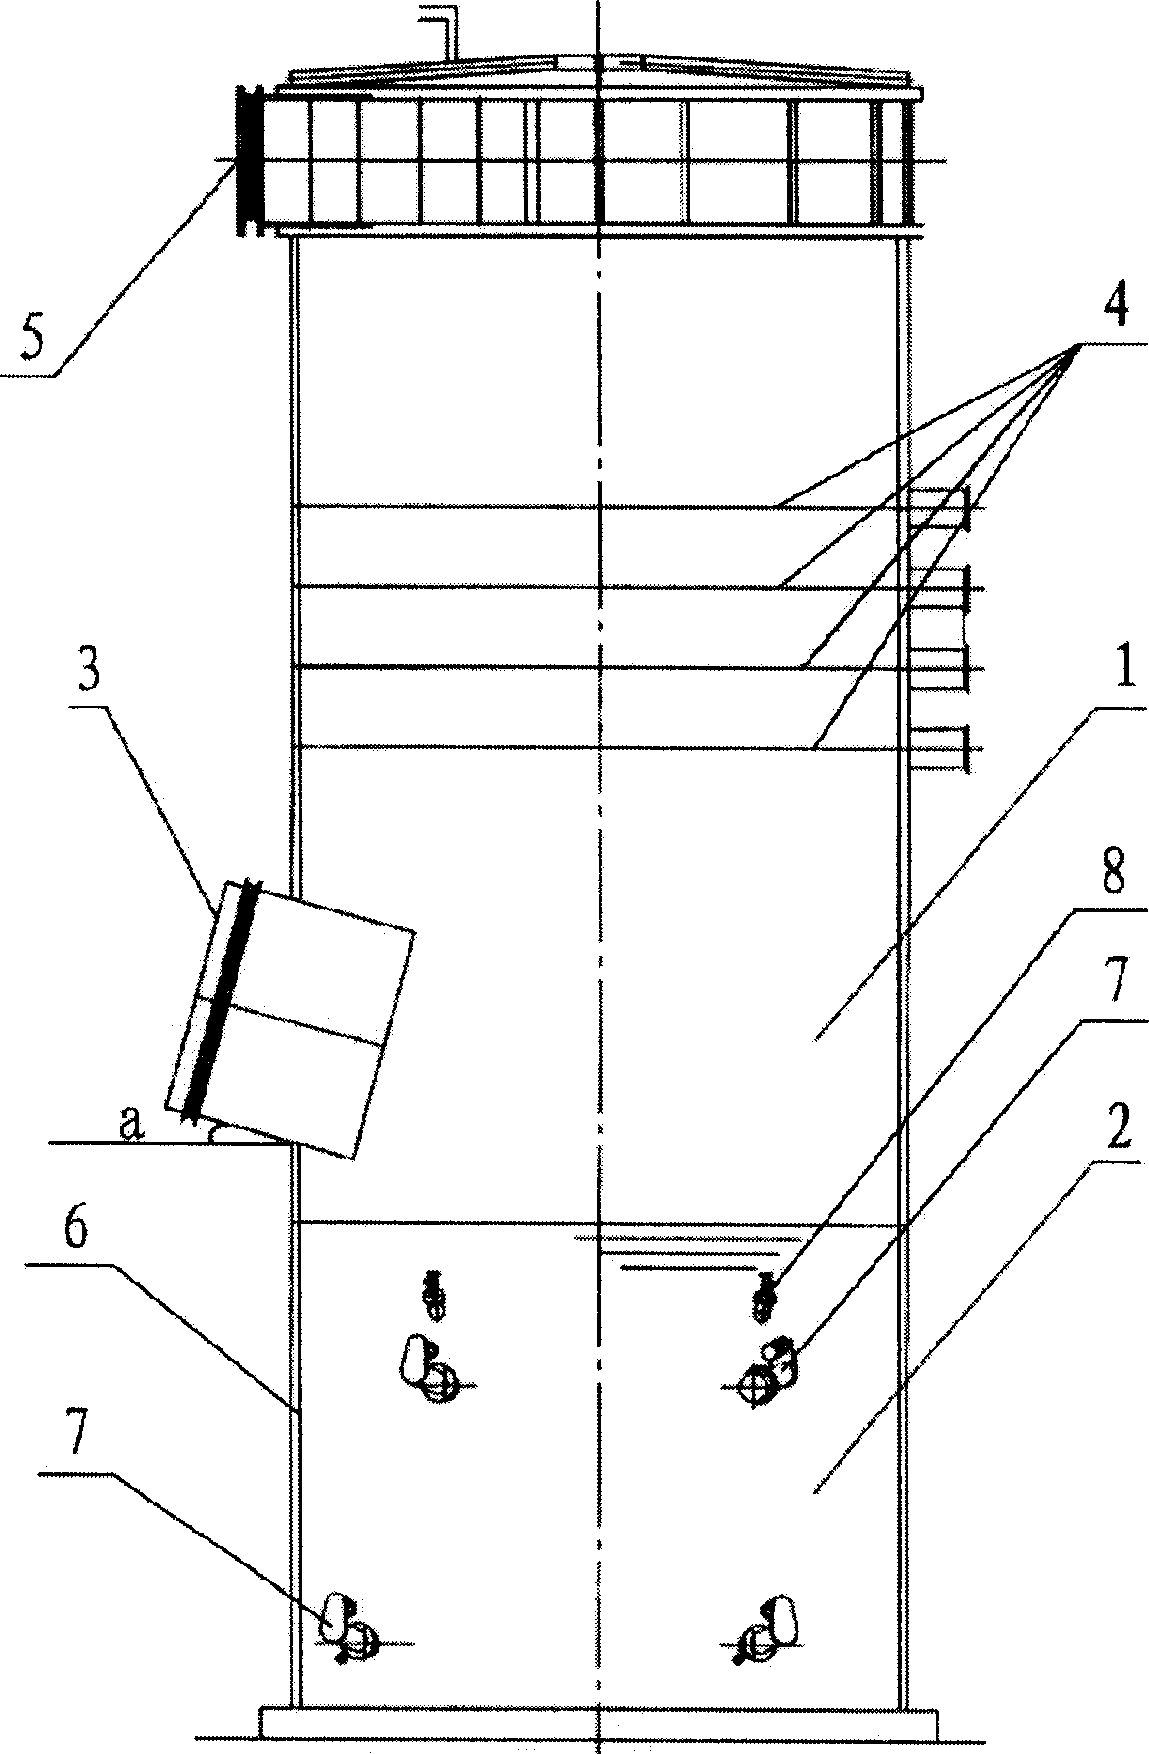 Square absorption tower for wet method desulfurization of flue gas